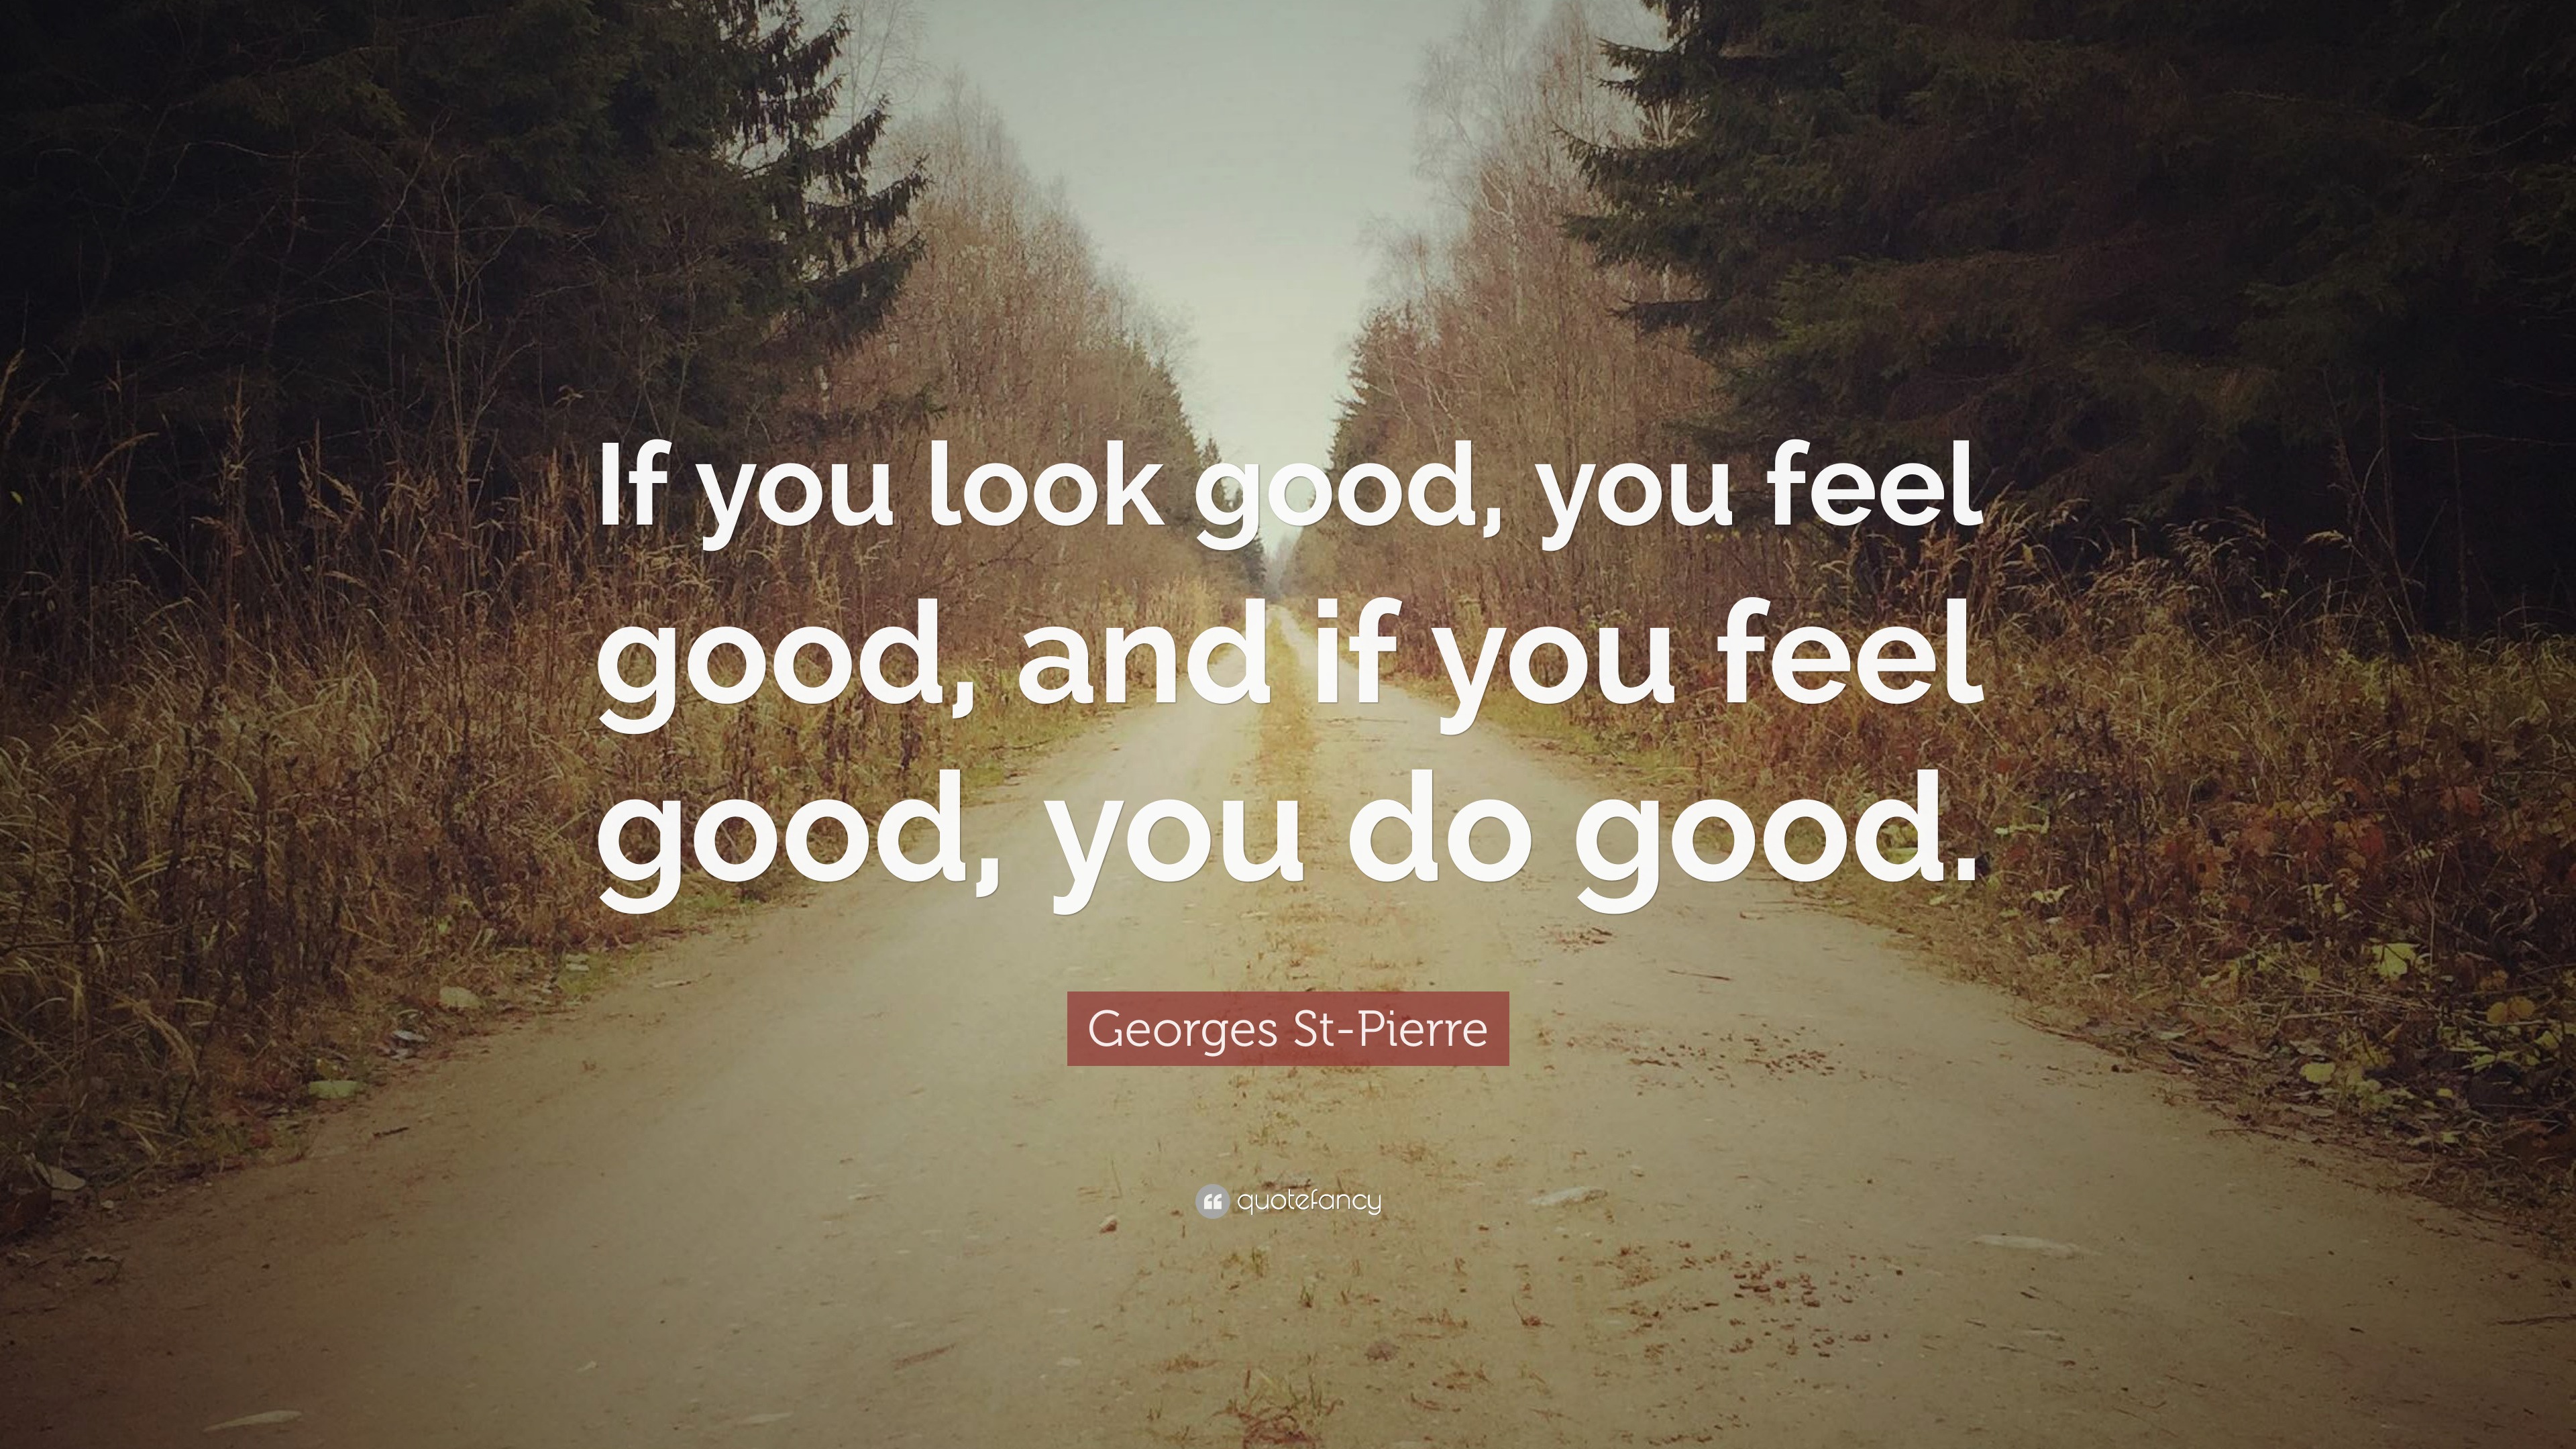 https://quotefancy.com/media/wallpaper/3840x2160/2166220-Georges-St-Pierre-Quote-If-you-look-good-you-feel-good-and-if-you.jpg